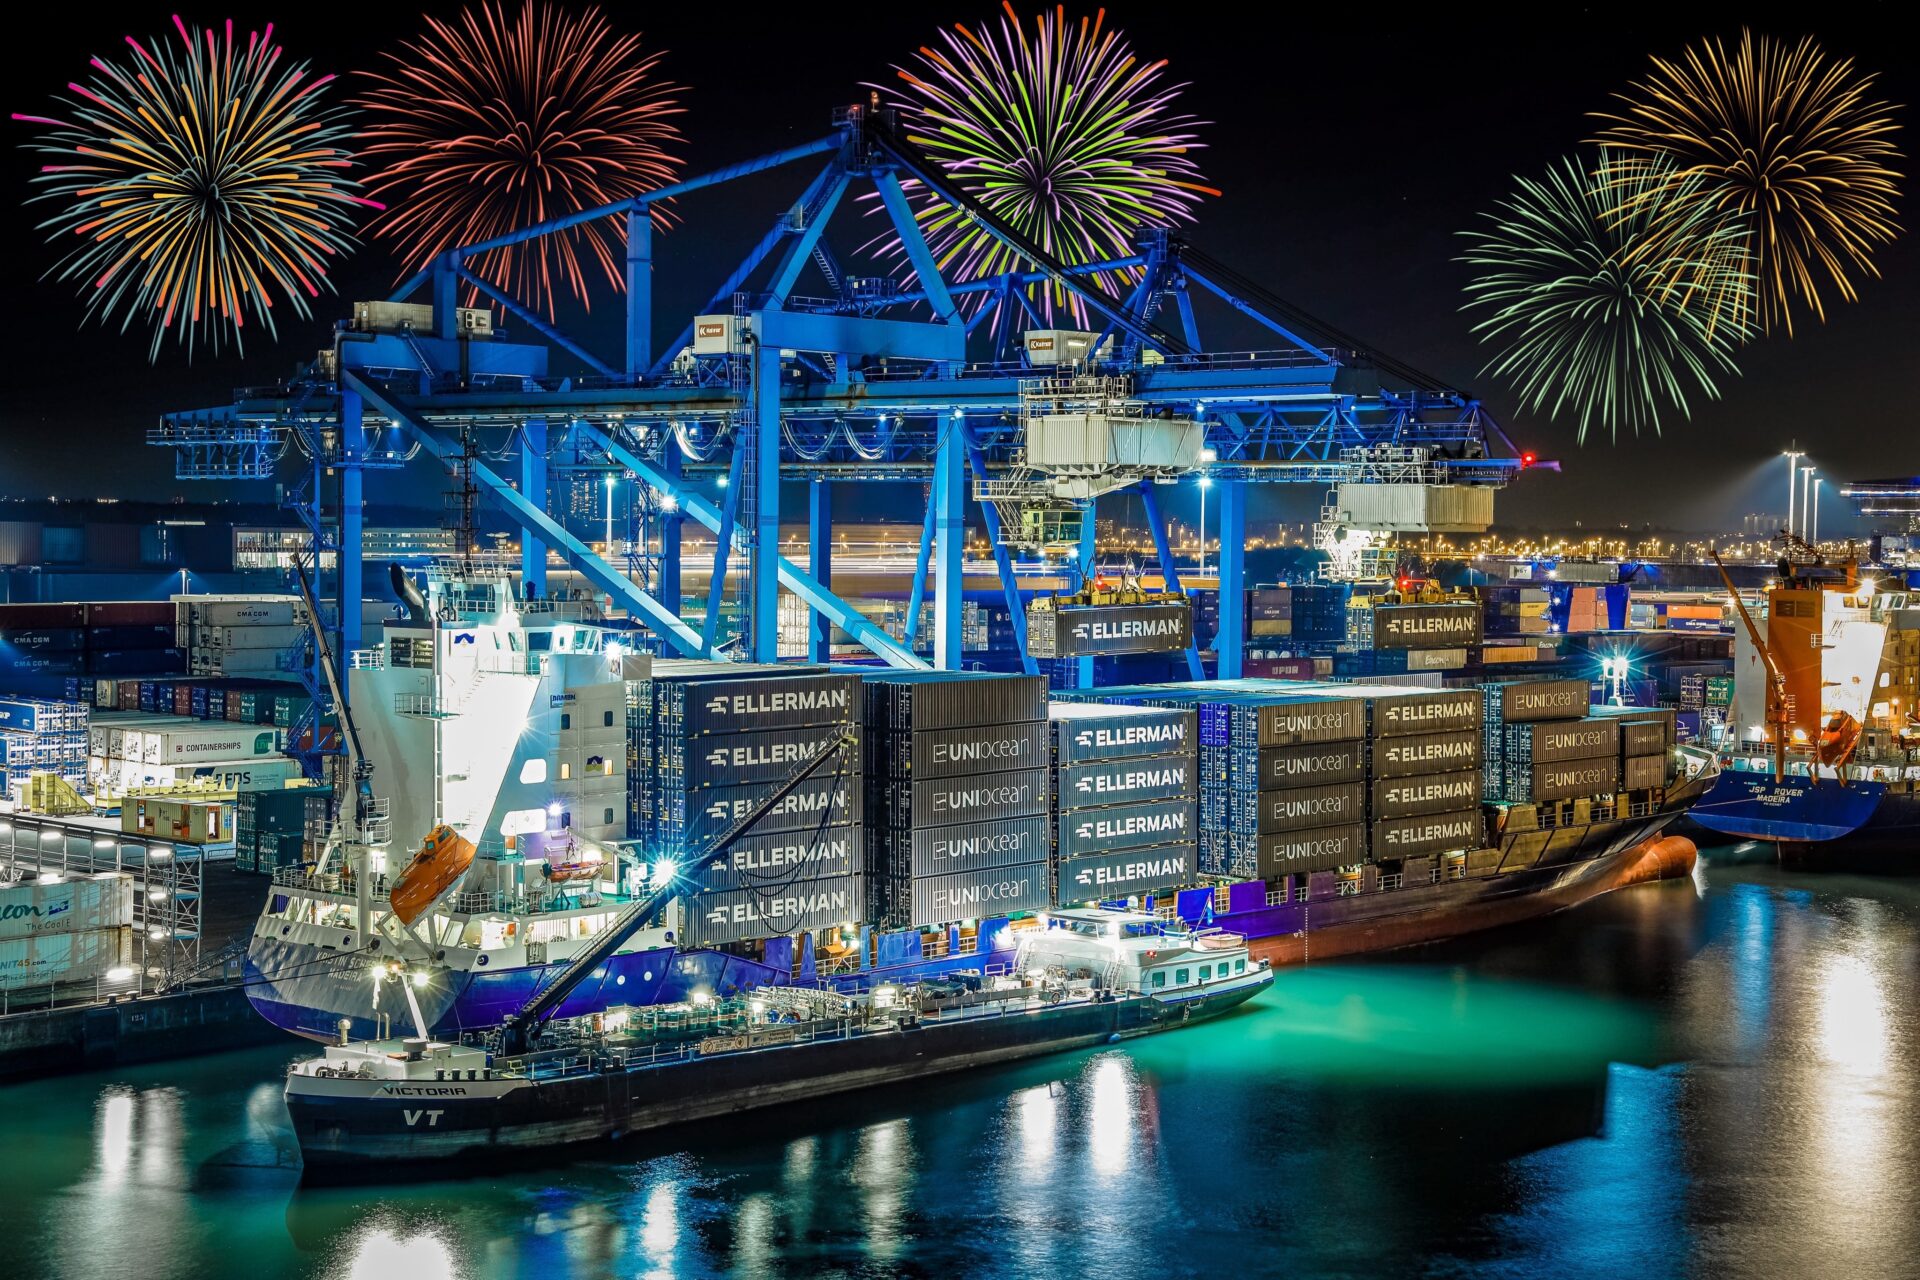 United States Express Service (USX)Now Calling At The Port Of Bilbao